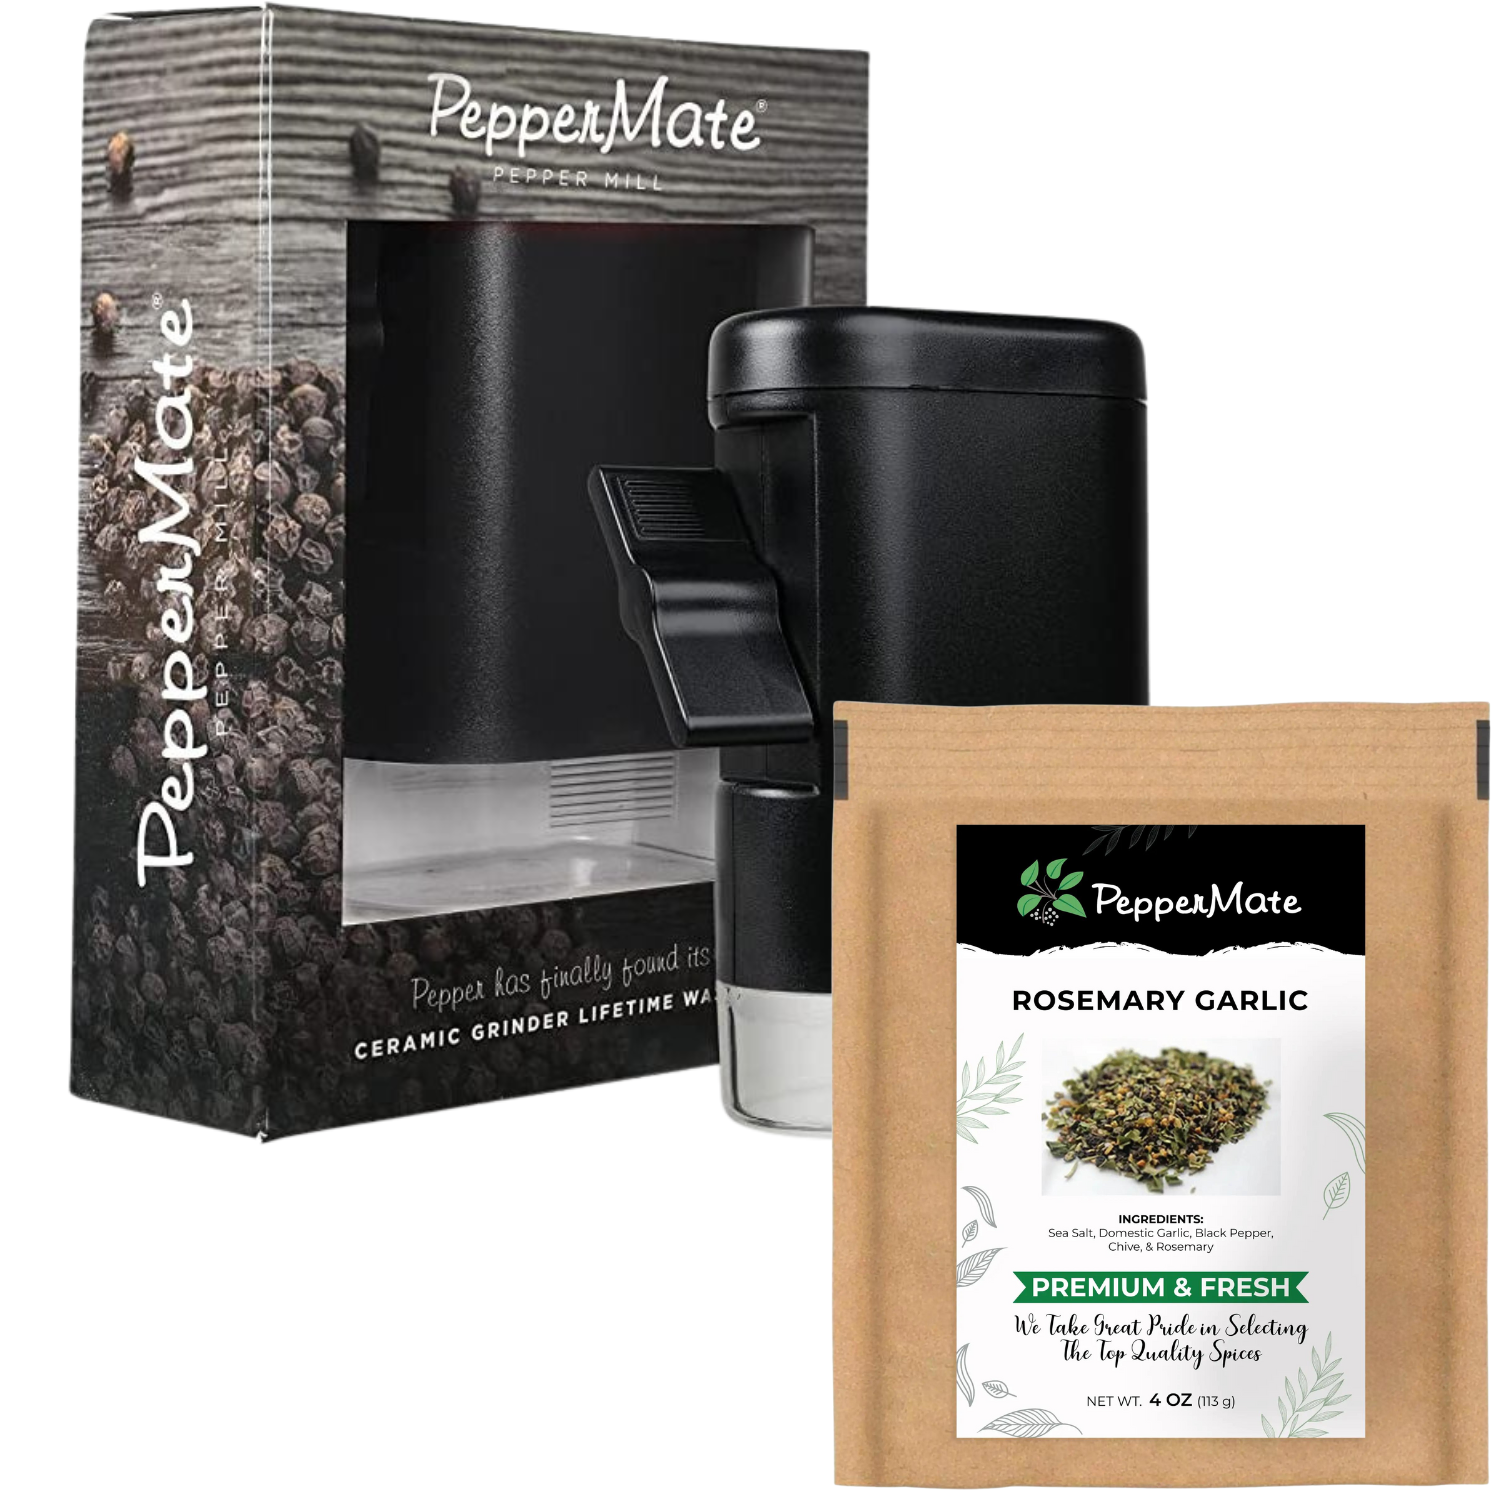 PepperMate Traditional Pepper Mill and Specialty Grindable Rosemary Garlic Blend